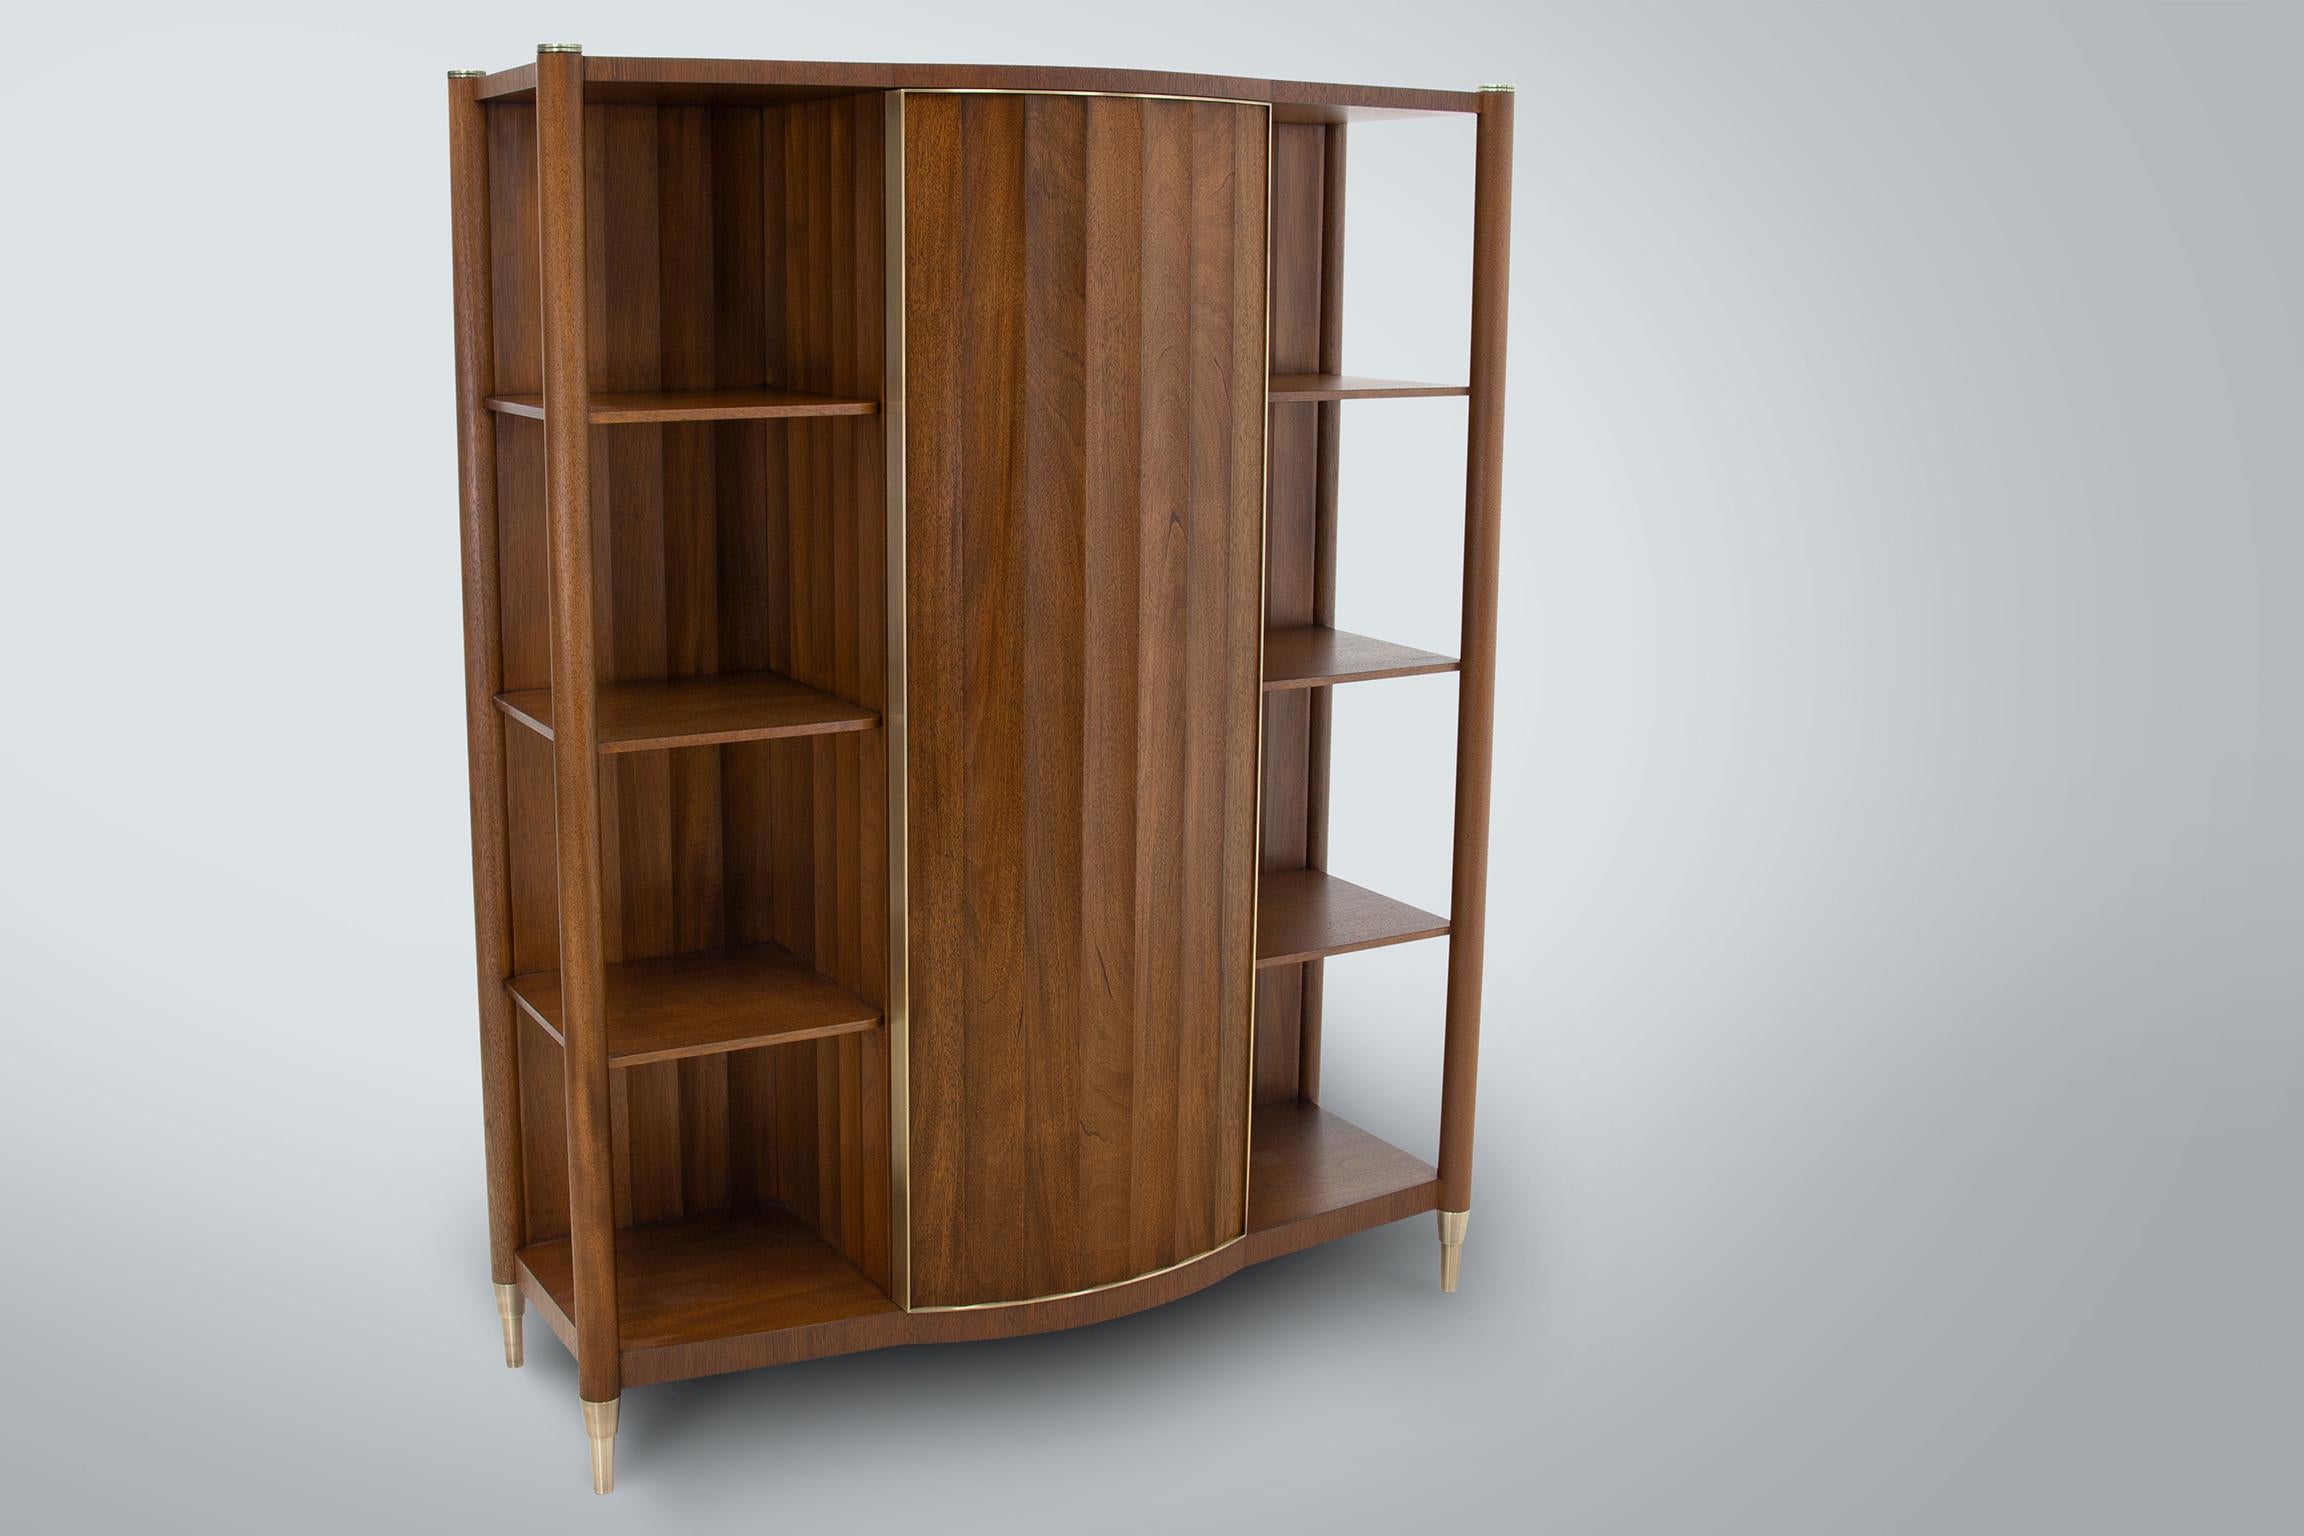 Our Landon Bookcase in scalloped Honduran Mahogany with hand rubbed oil finish and patinated brass accents.